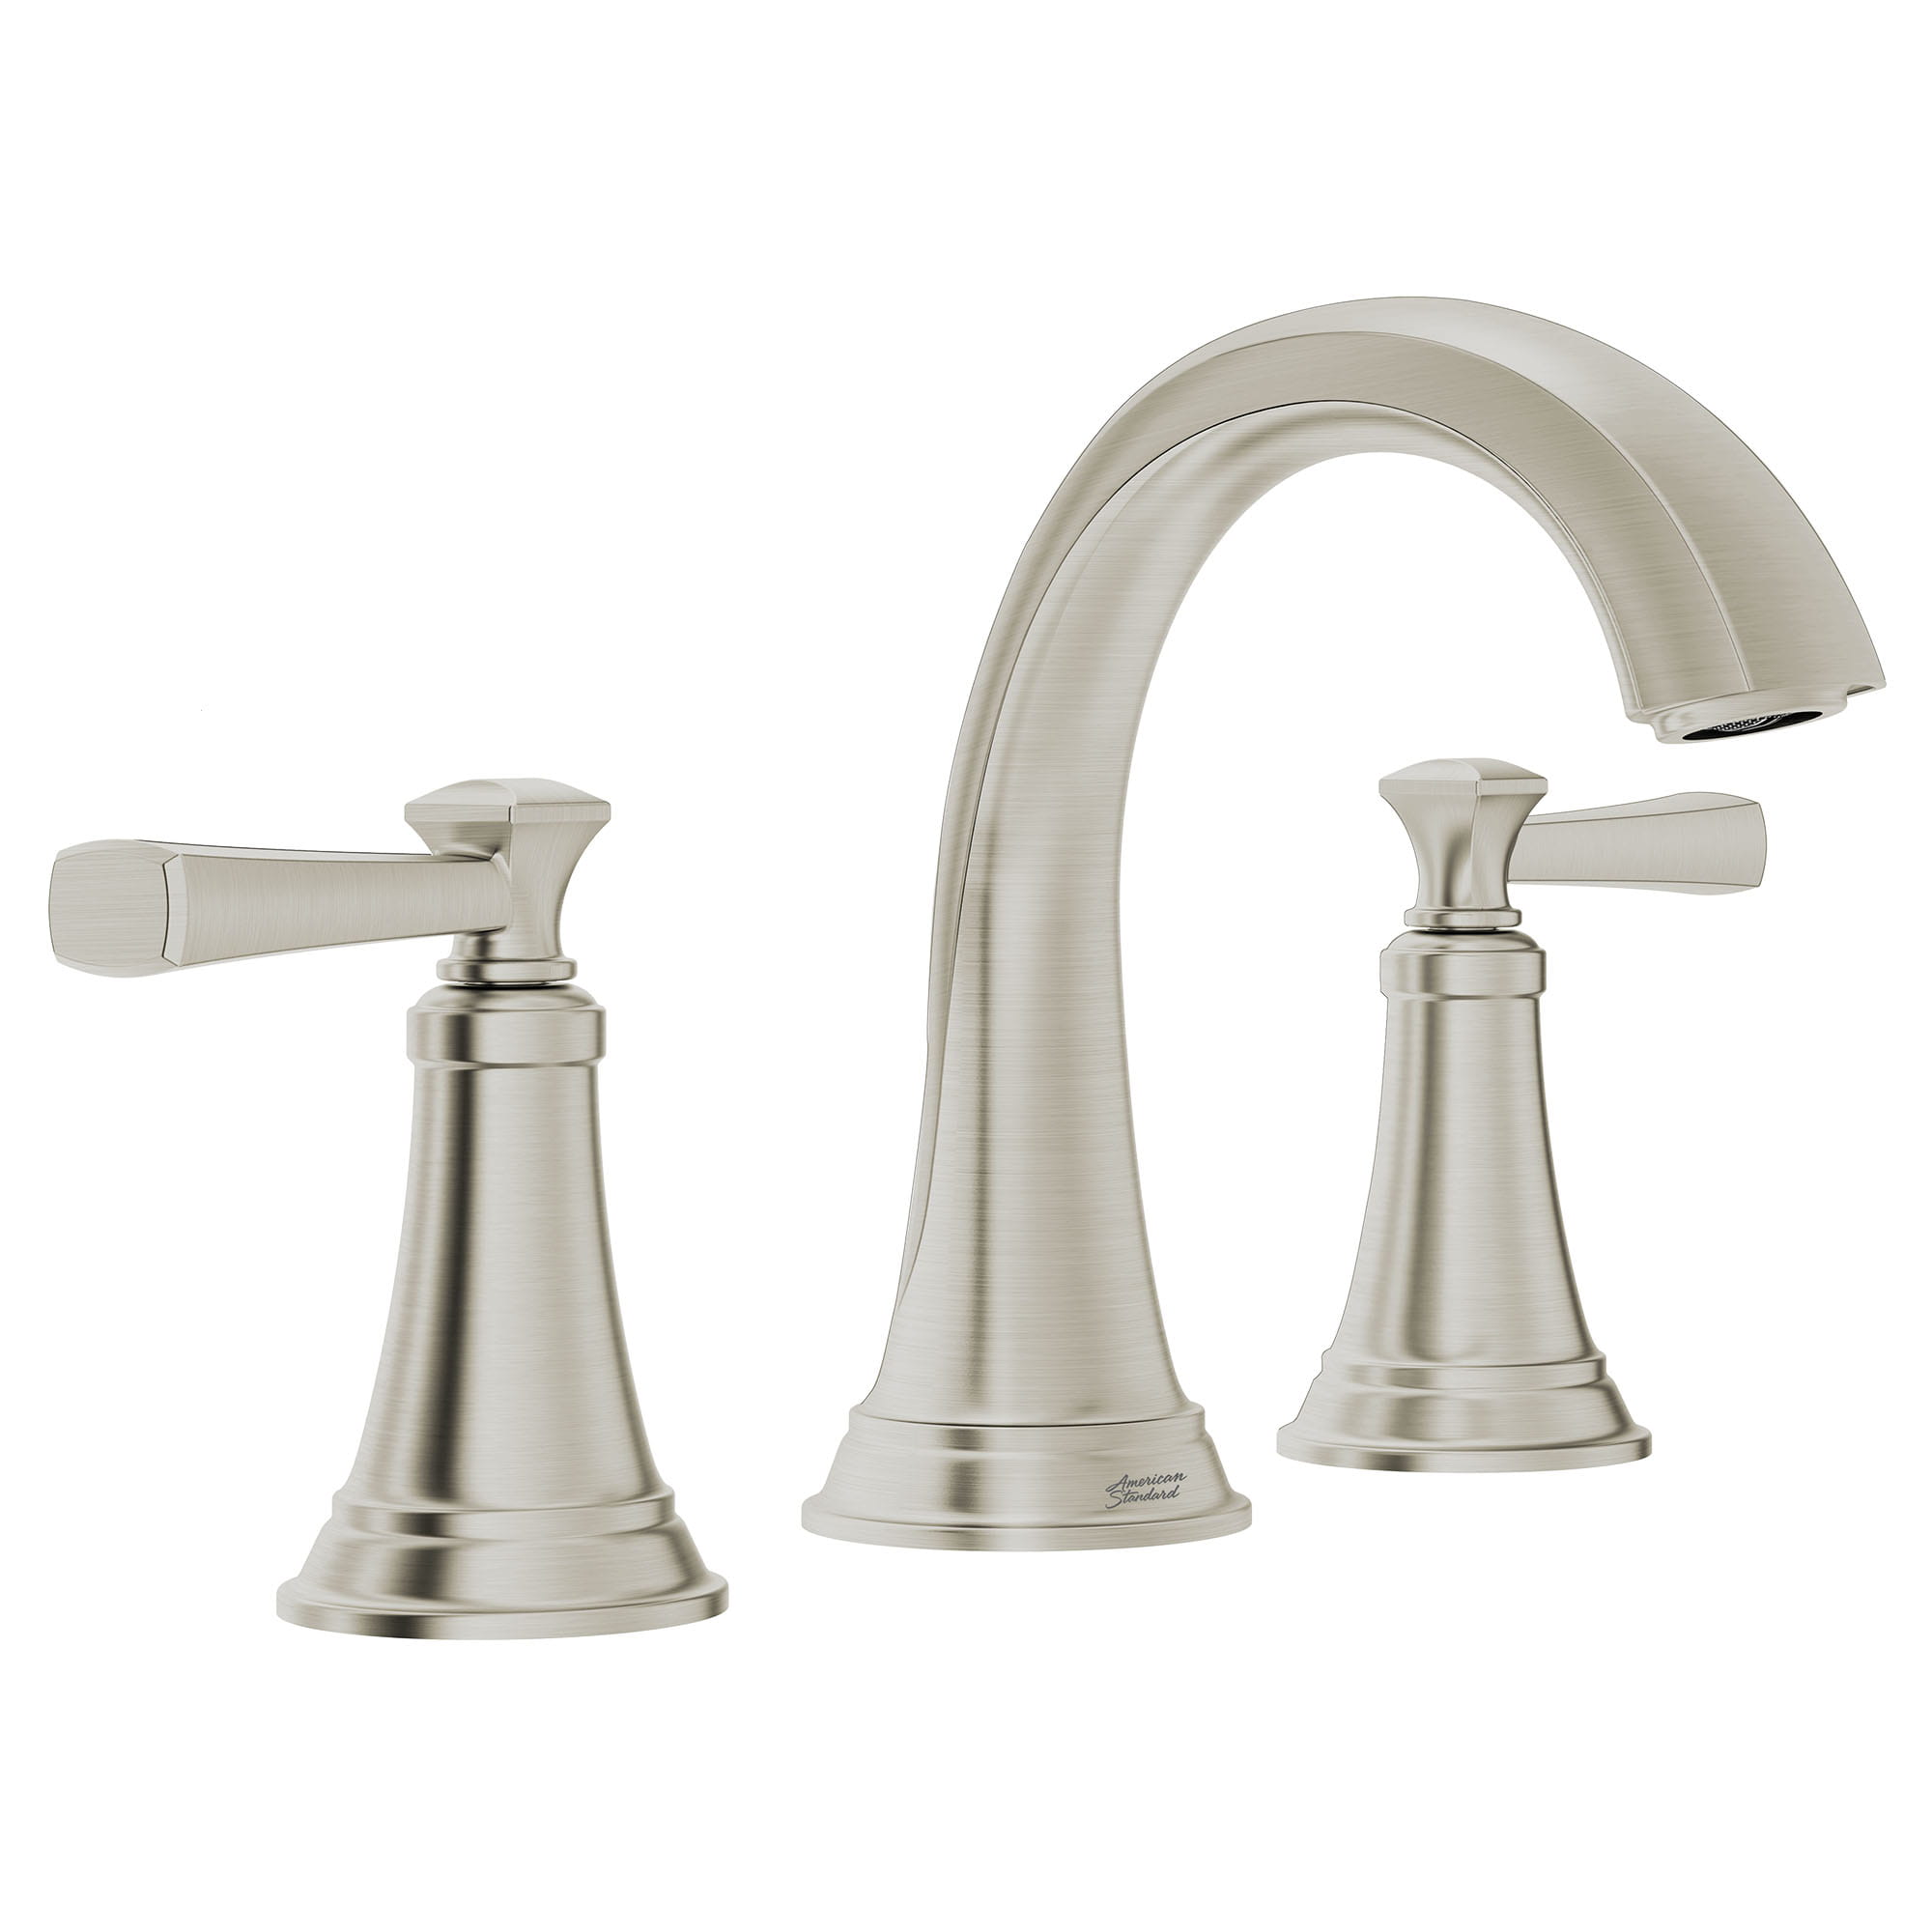 Glenmere 8 Inch Widespread 2 Handle Bathroom Faucet with Metal Drain BRUSHED NICKEL